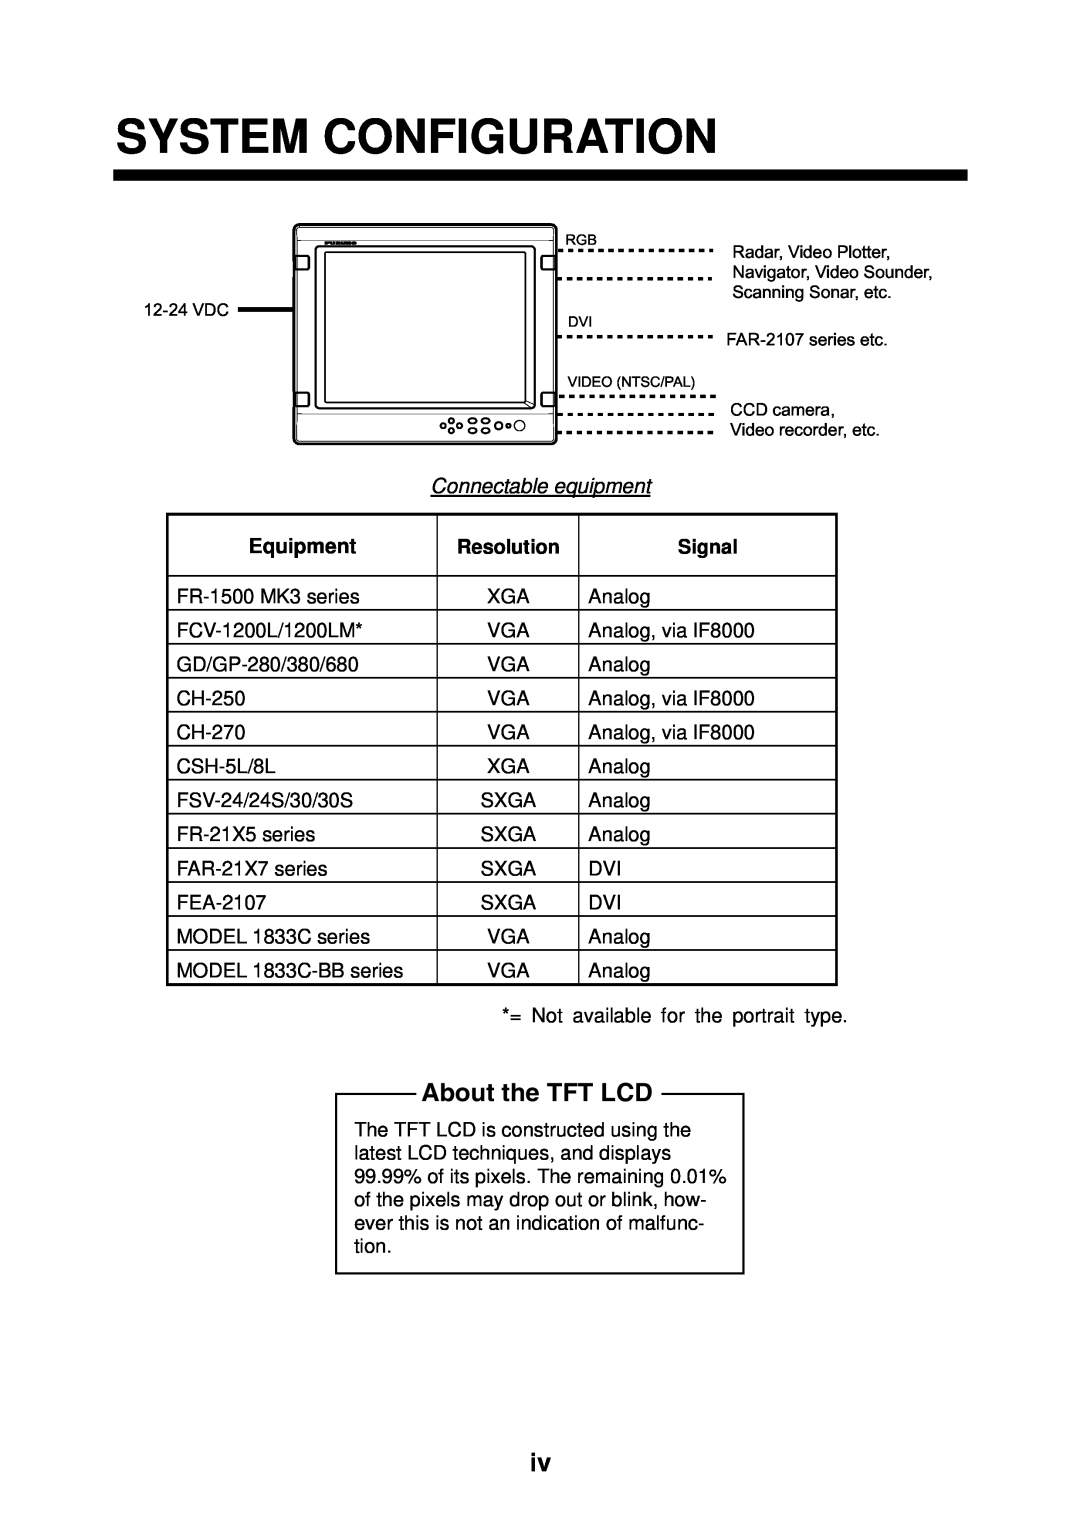 Furuno MU-155C manual System Configuration, About the TFT LCD, Equipment, Signal 